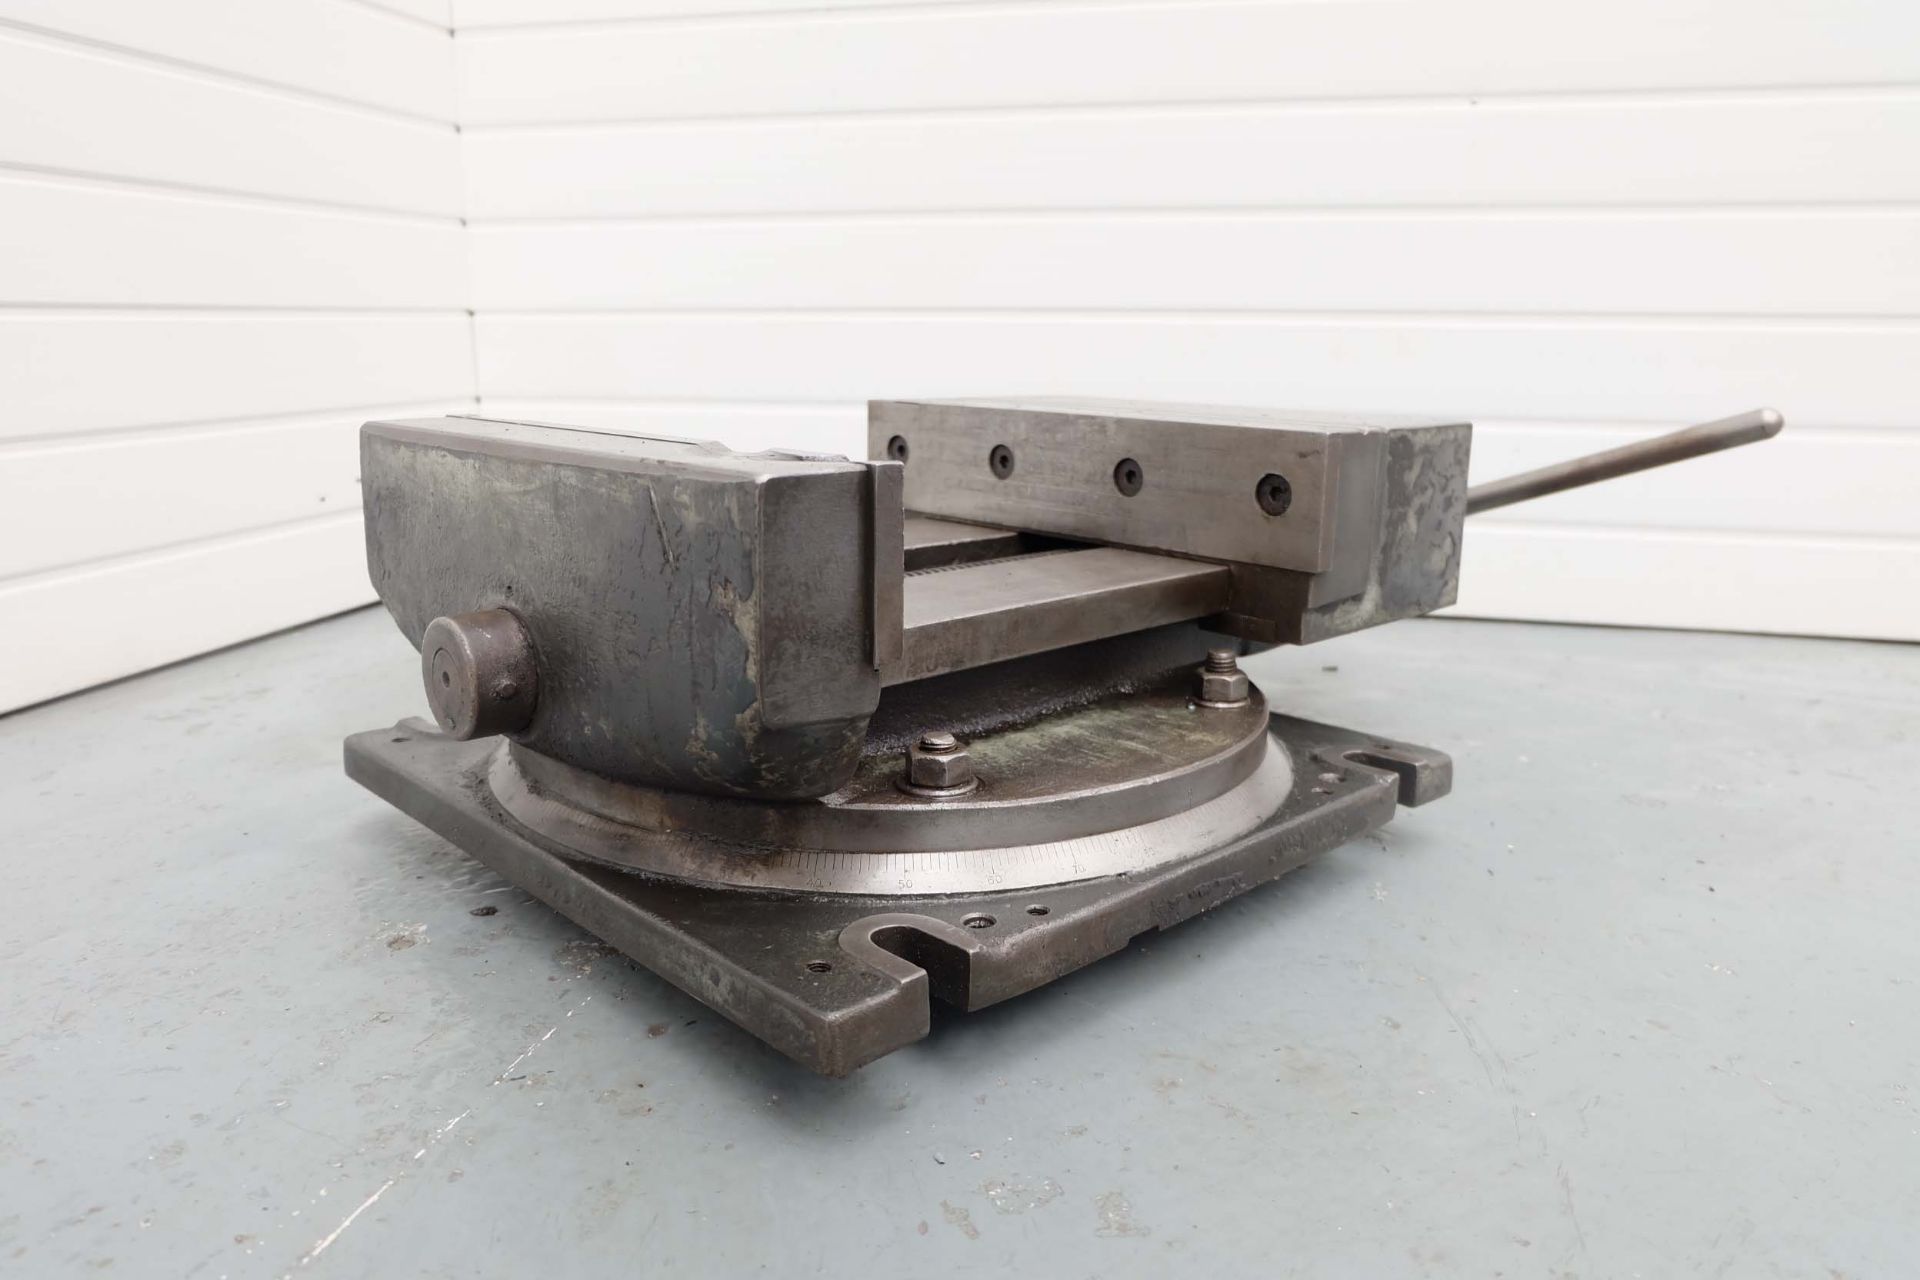 14" Swivelling Machine Vice. Width of Jaws 14". Height of Jaws 3". Max Opening 14". Clamping Slot Di - Image 3 of 8